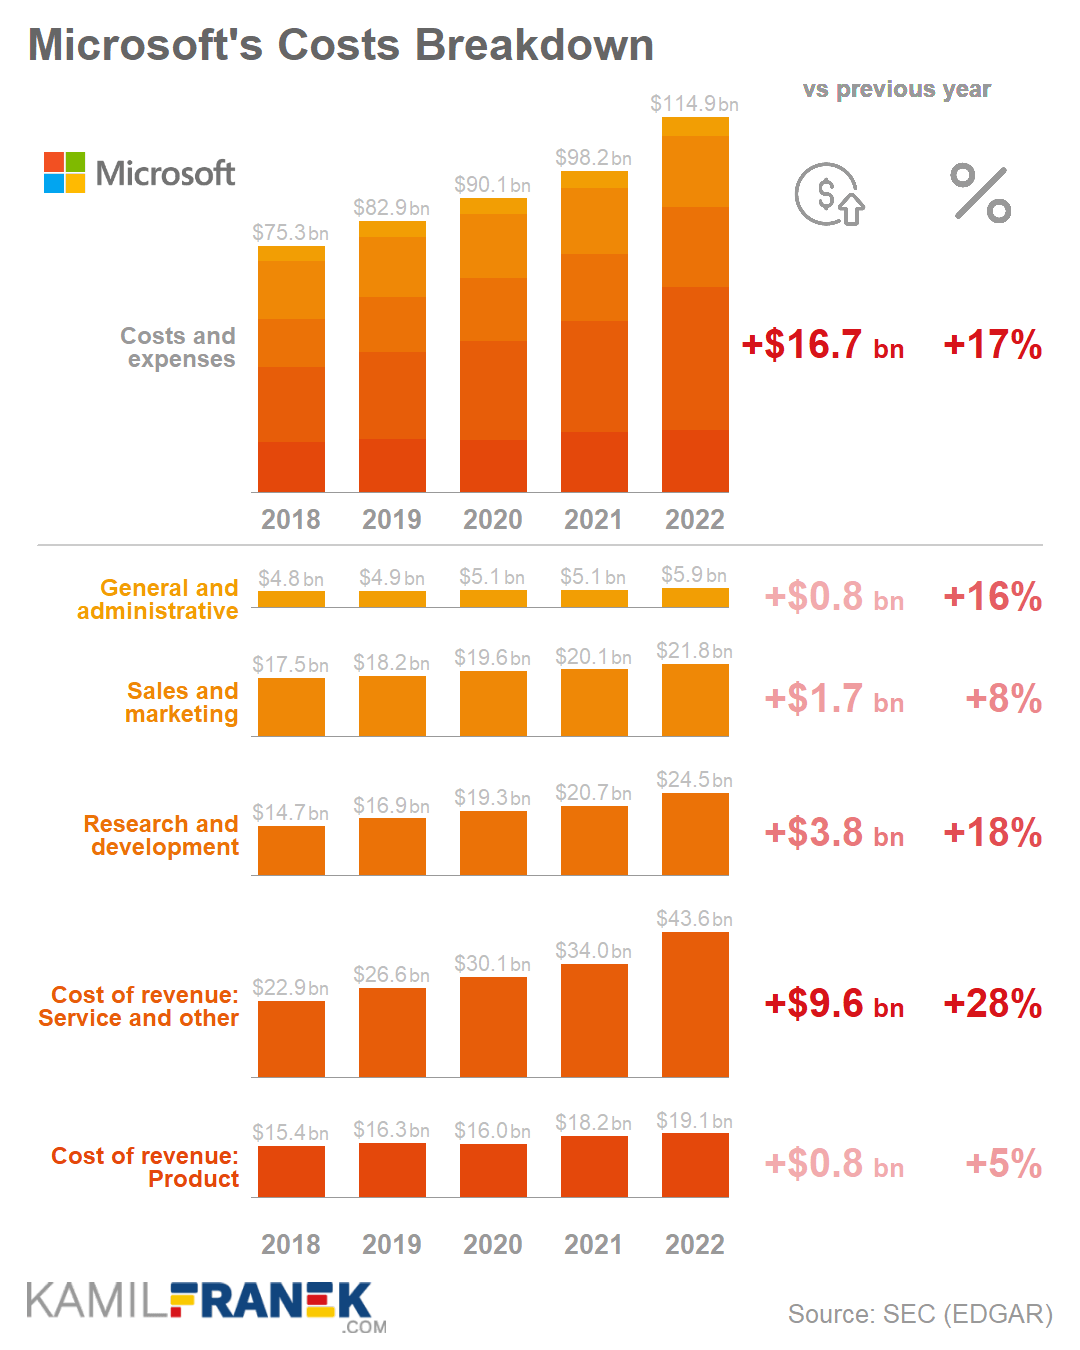 Microsoft's costs and expenses breakdown chart